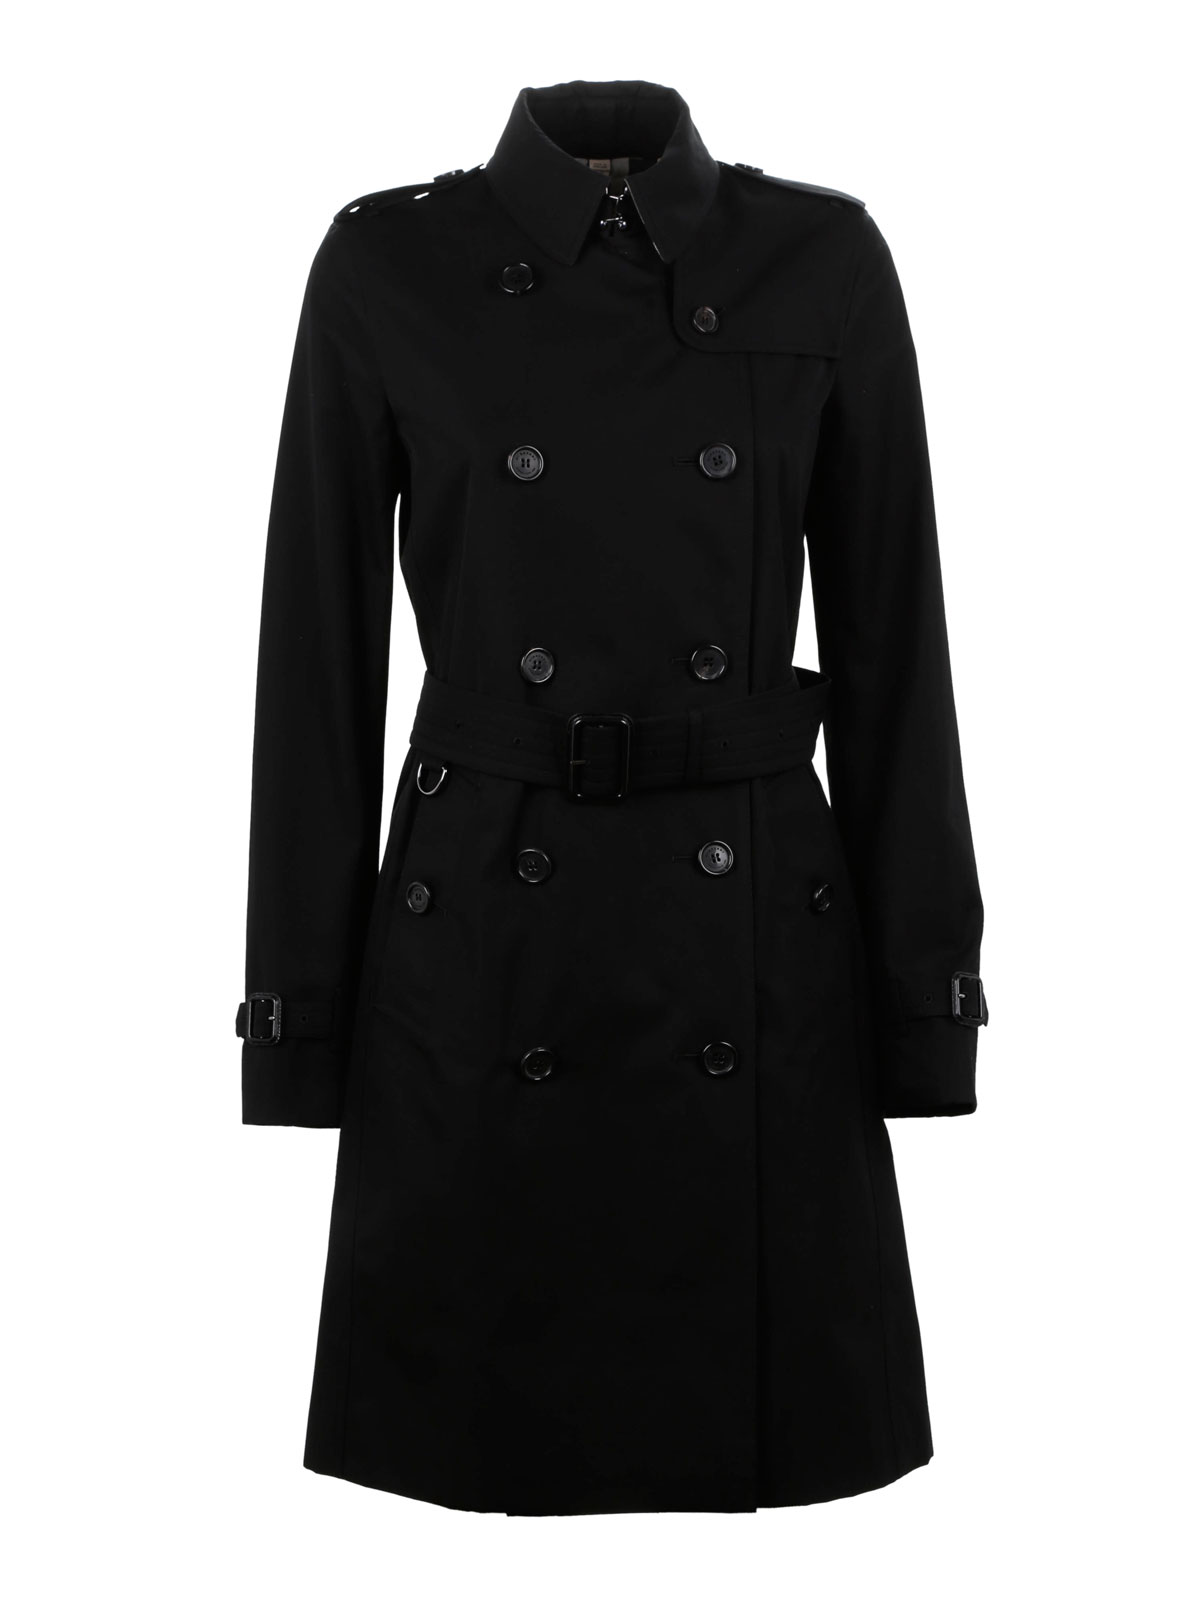 Trench coats Burberry - Kensington Trench - 3900456 | Shop online at iKRIX